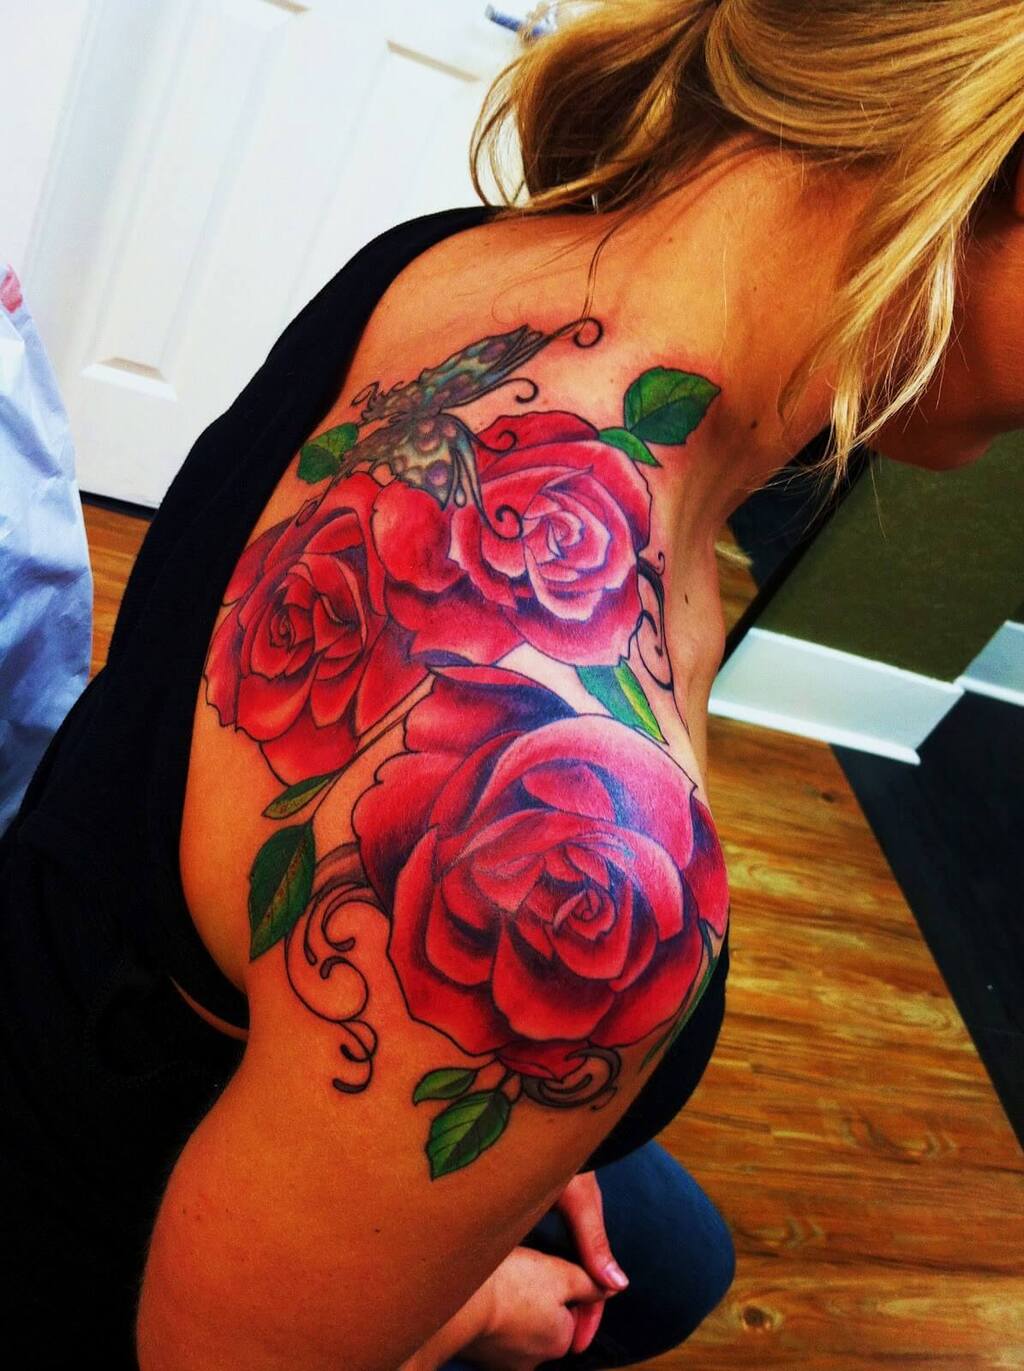 Colourful Rose Tattoo For Shoulder